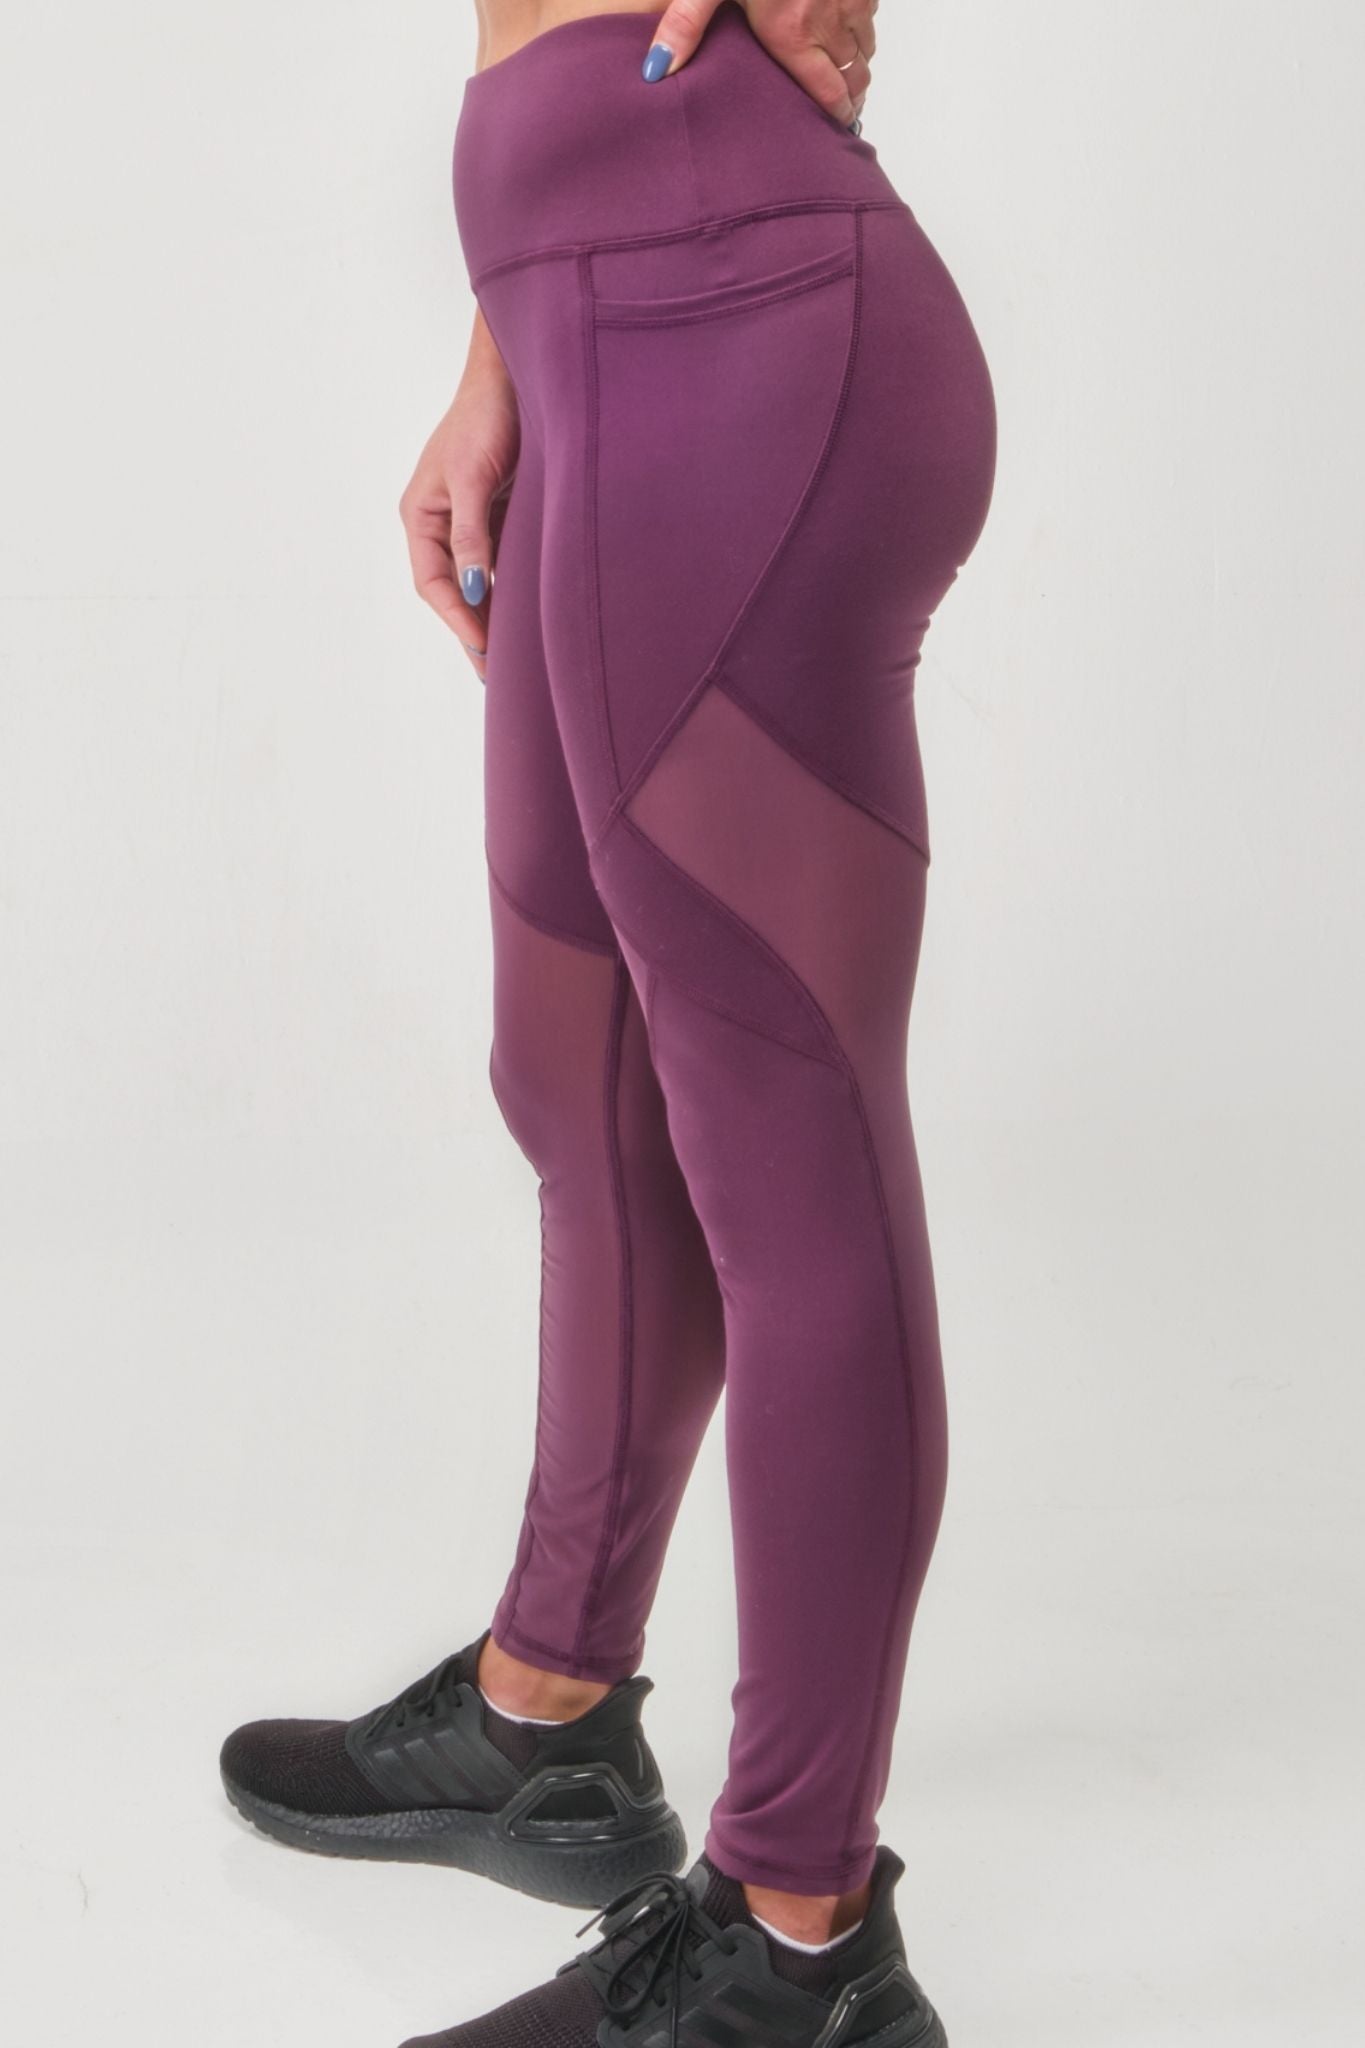 
                  
                    High-Rise Mesh Legging with Pockets by Seaav
                  
                